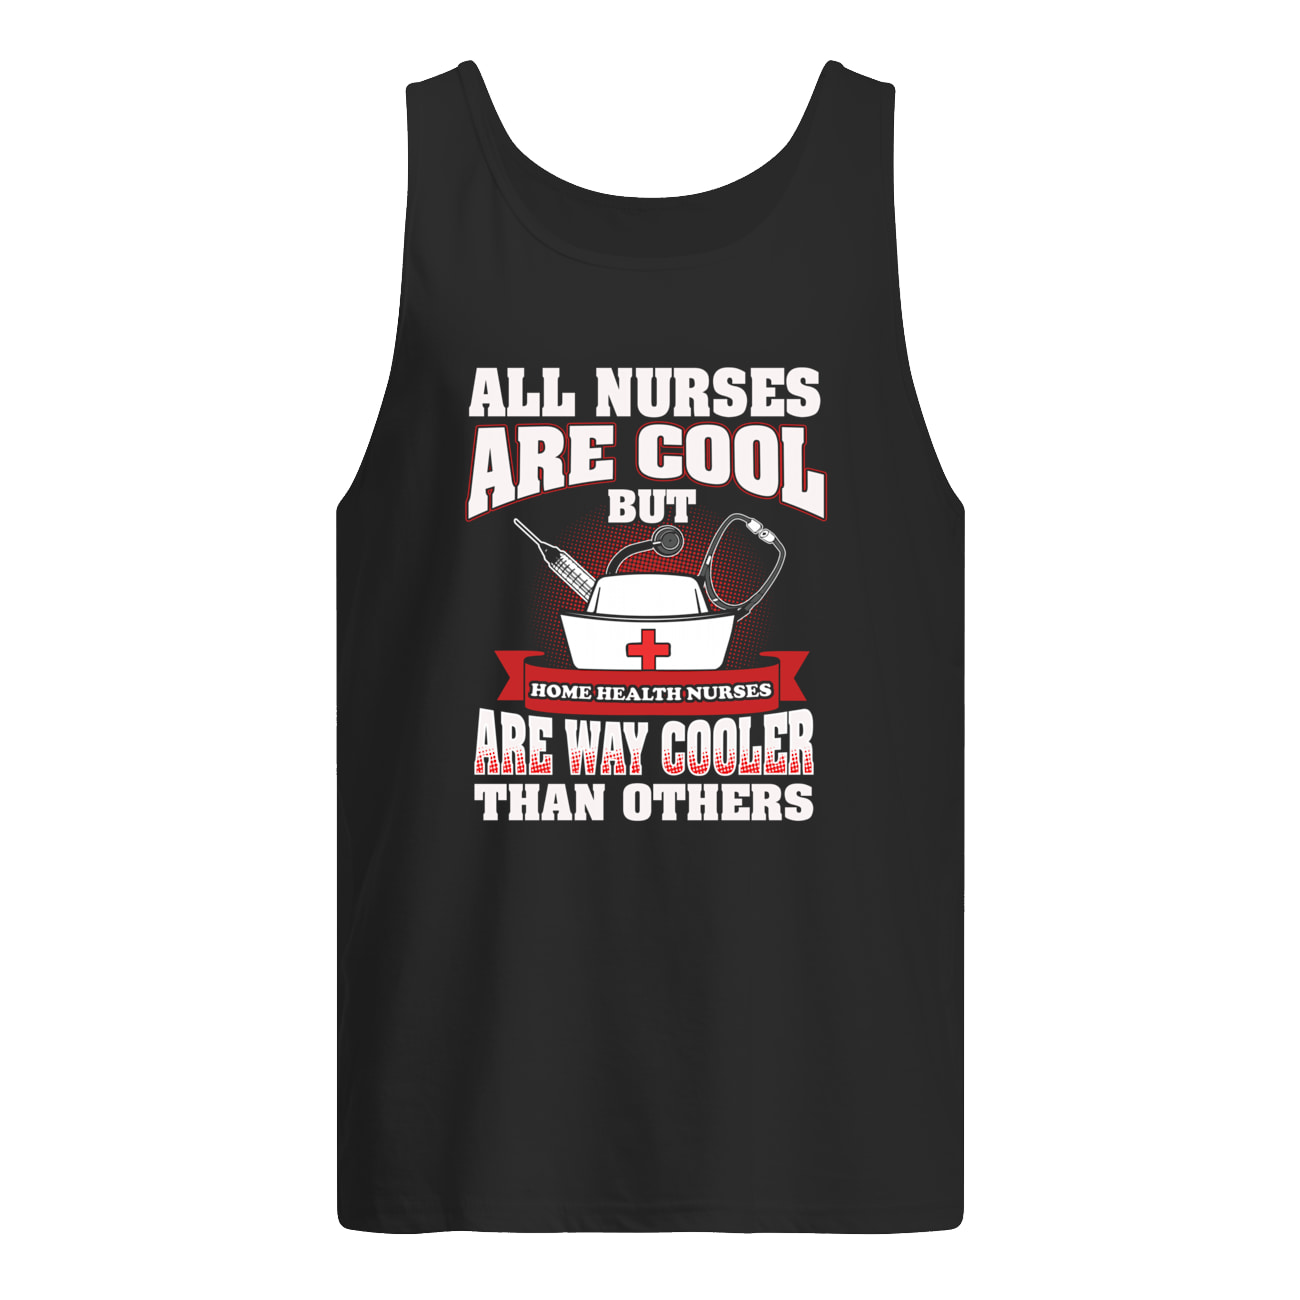 All Nurses Are Cool But Are Way Cooler Than Others Shirt